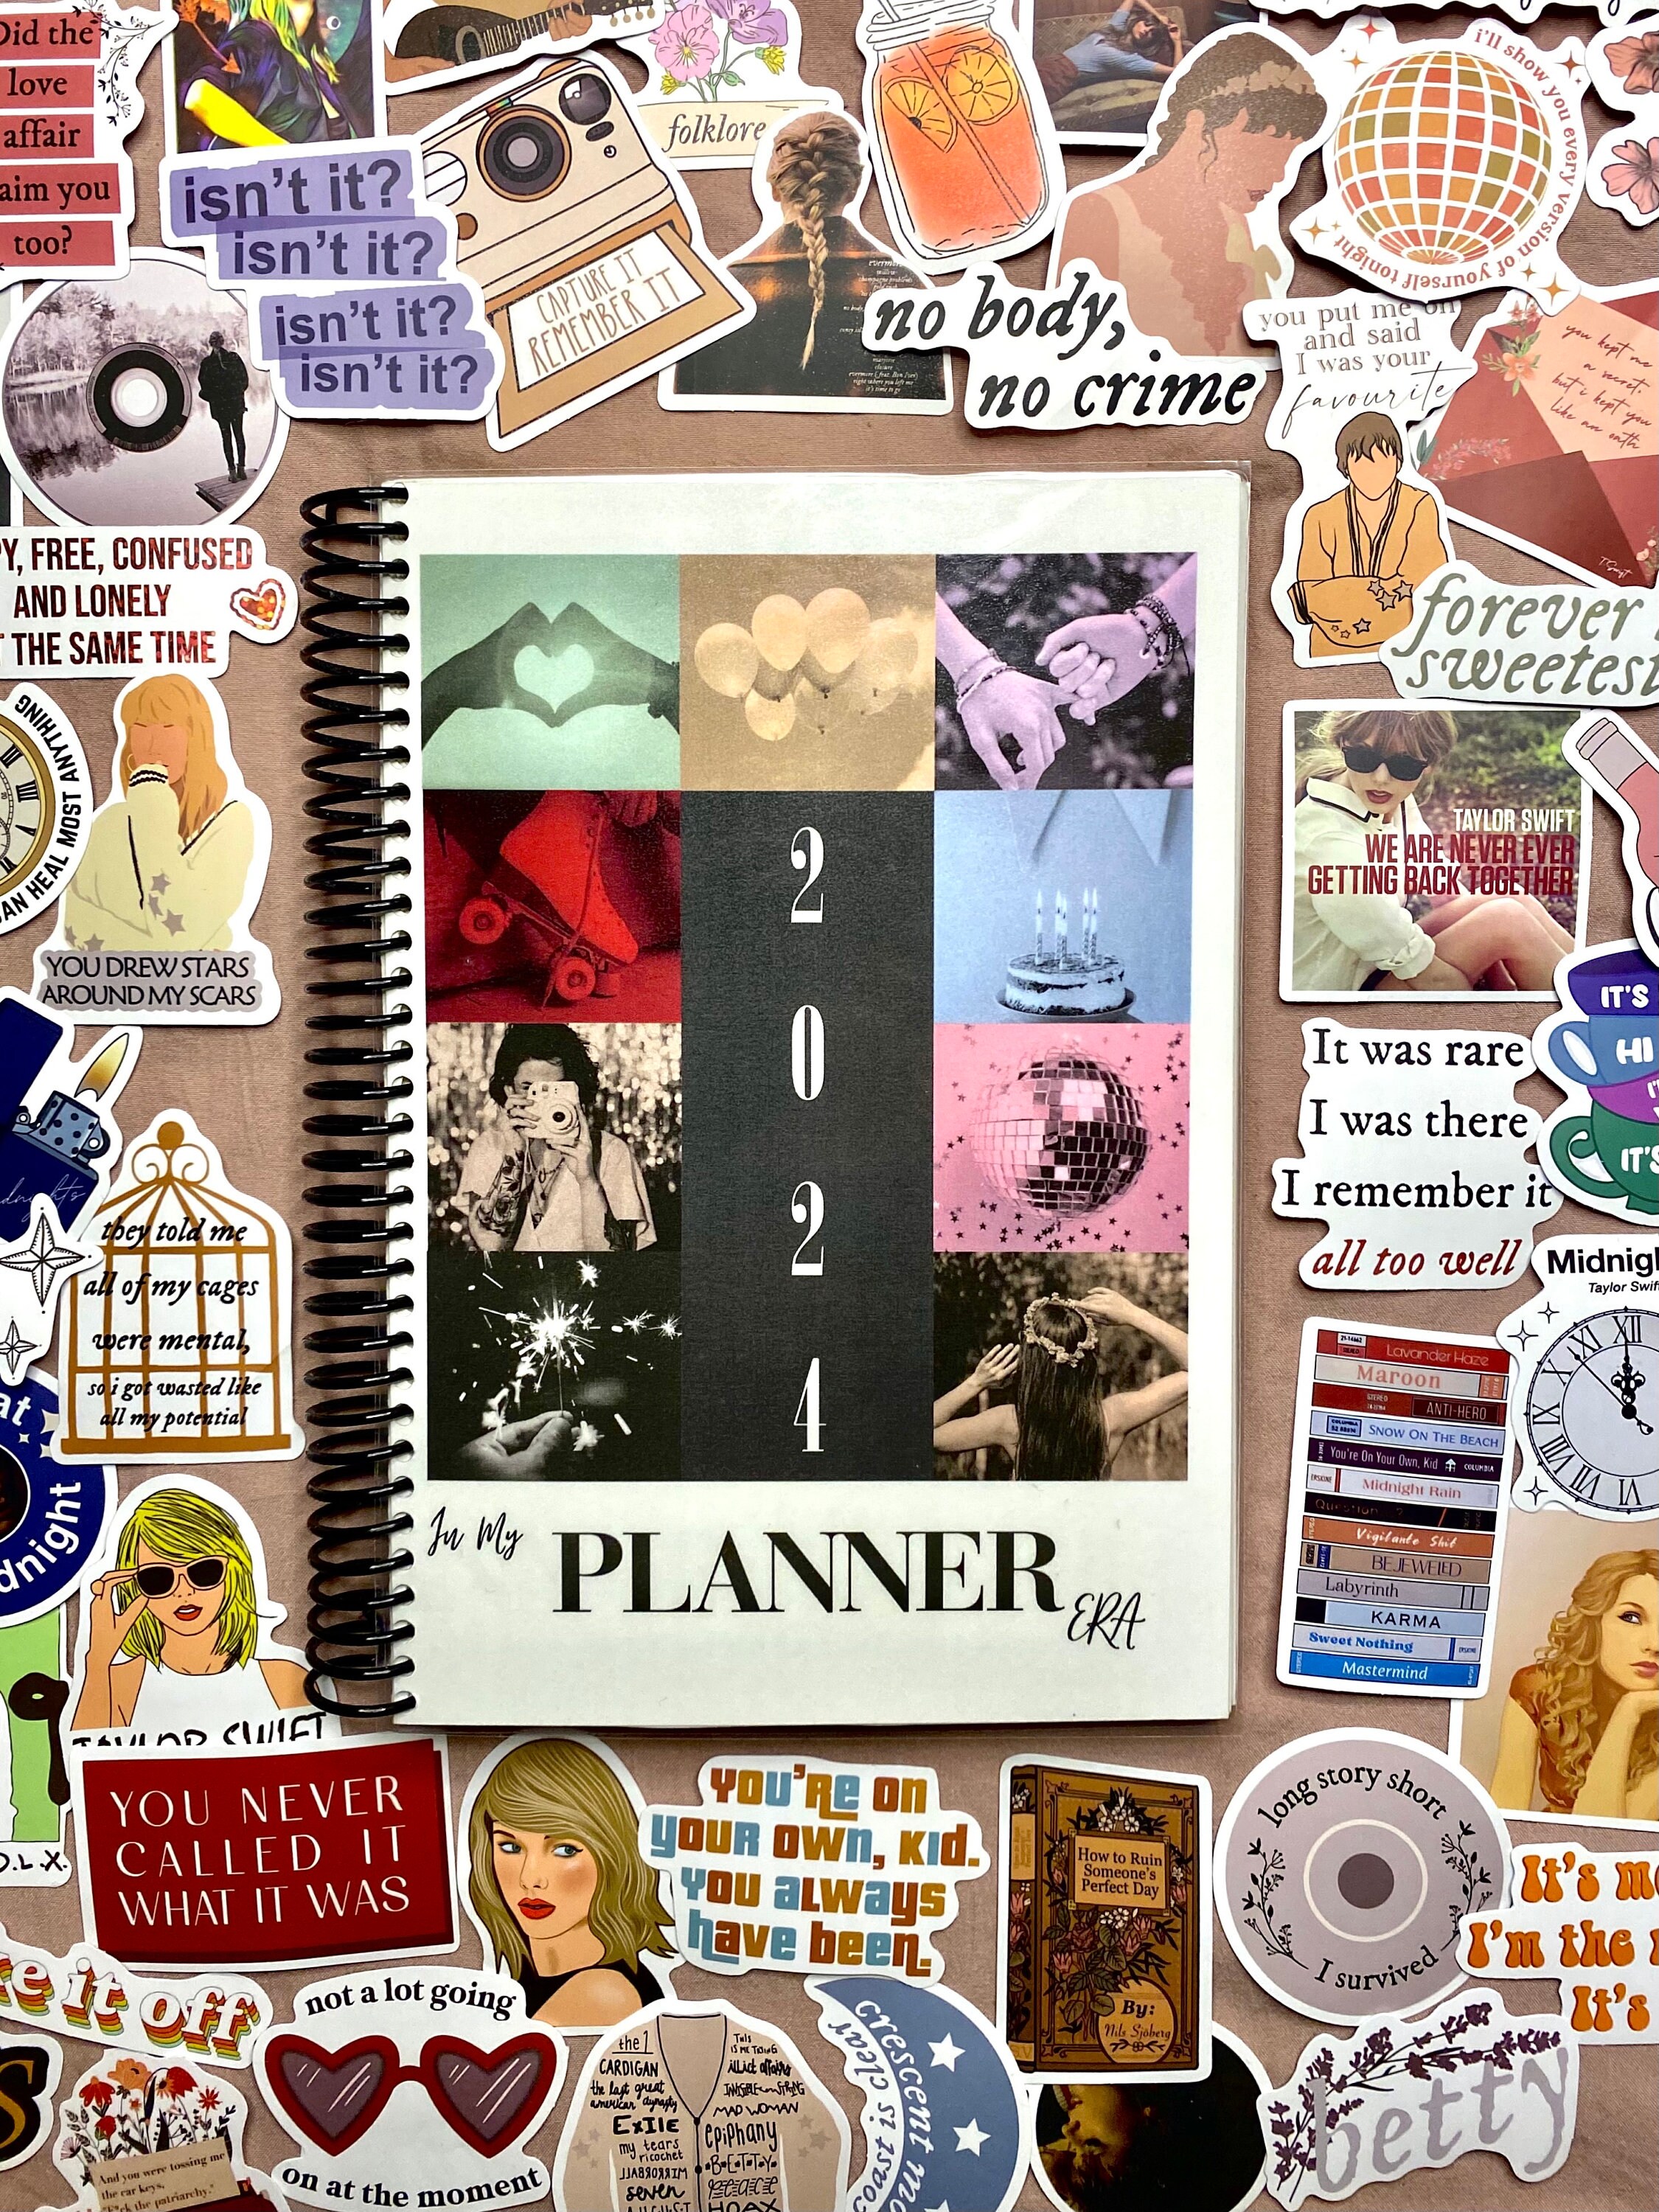 Taylor Swift Inspired 2024 Planner 167 Pages of Organisation, Diary,  Calendar, 2 Pages per Week, Notes, Aims, Targets, Goals 